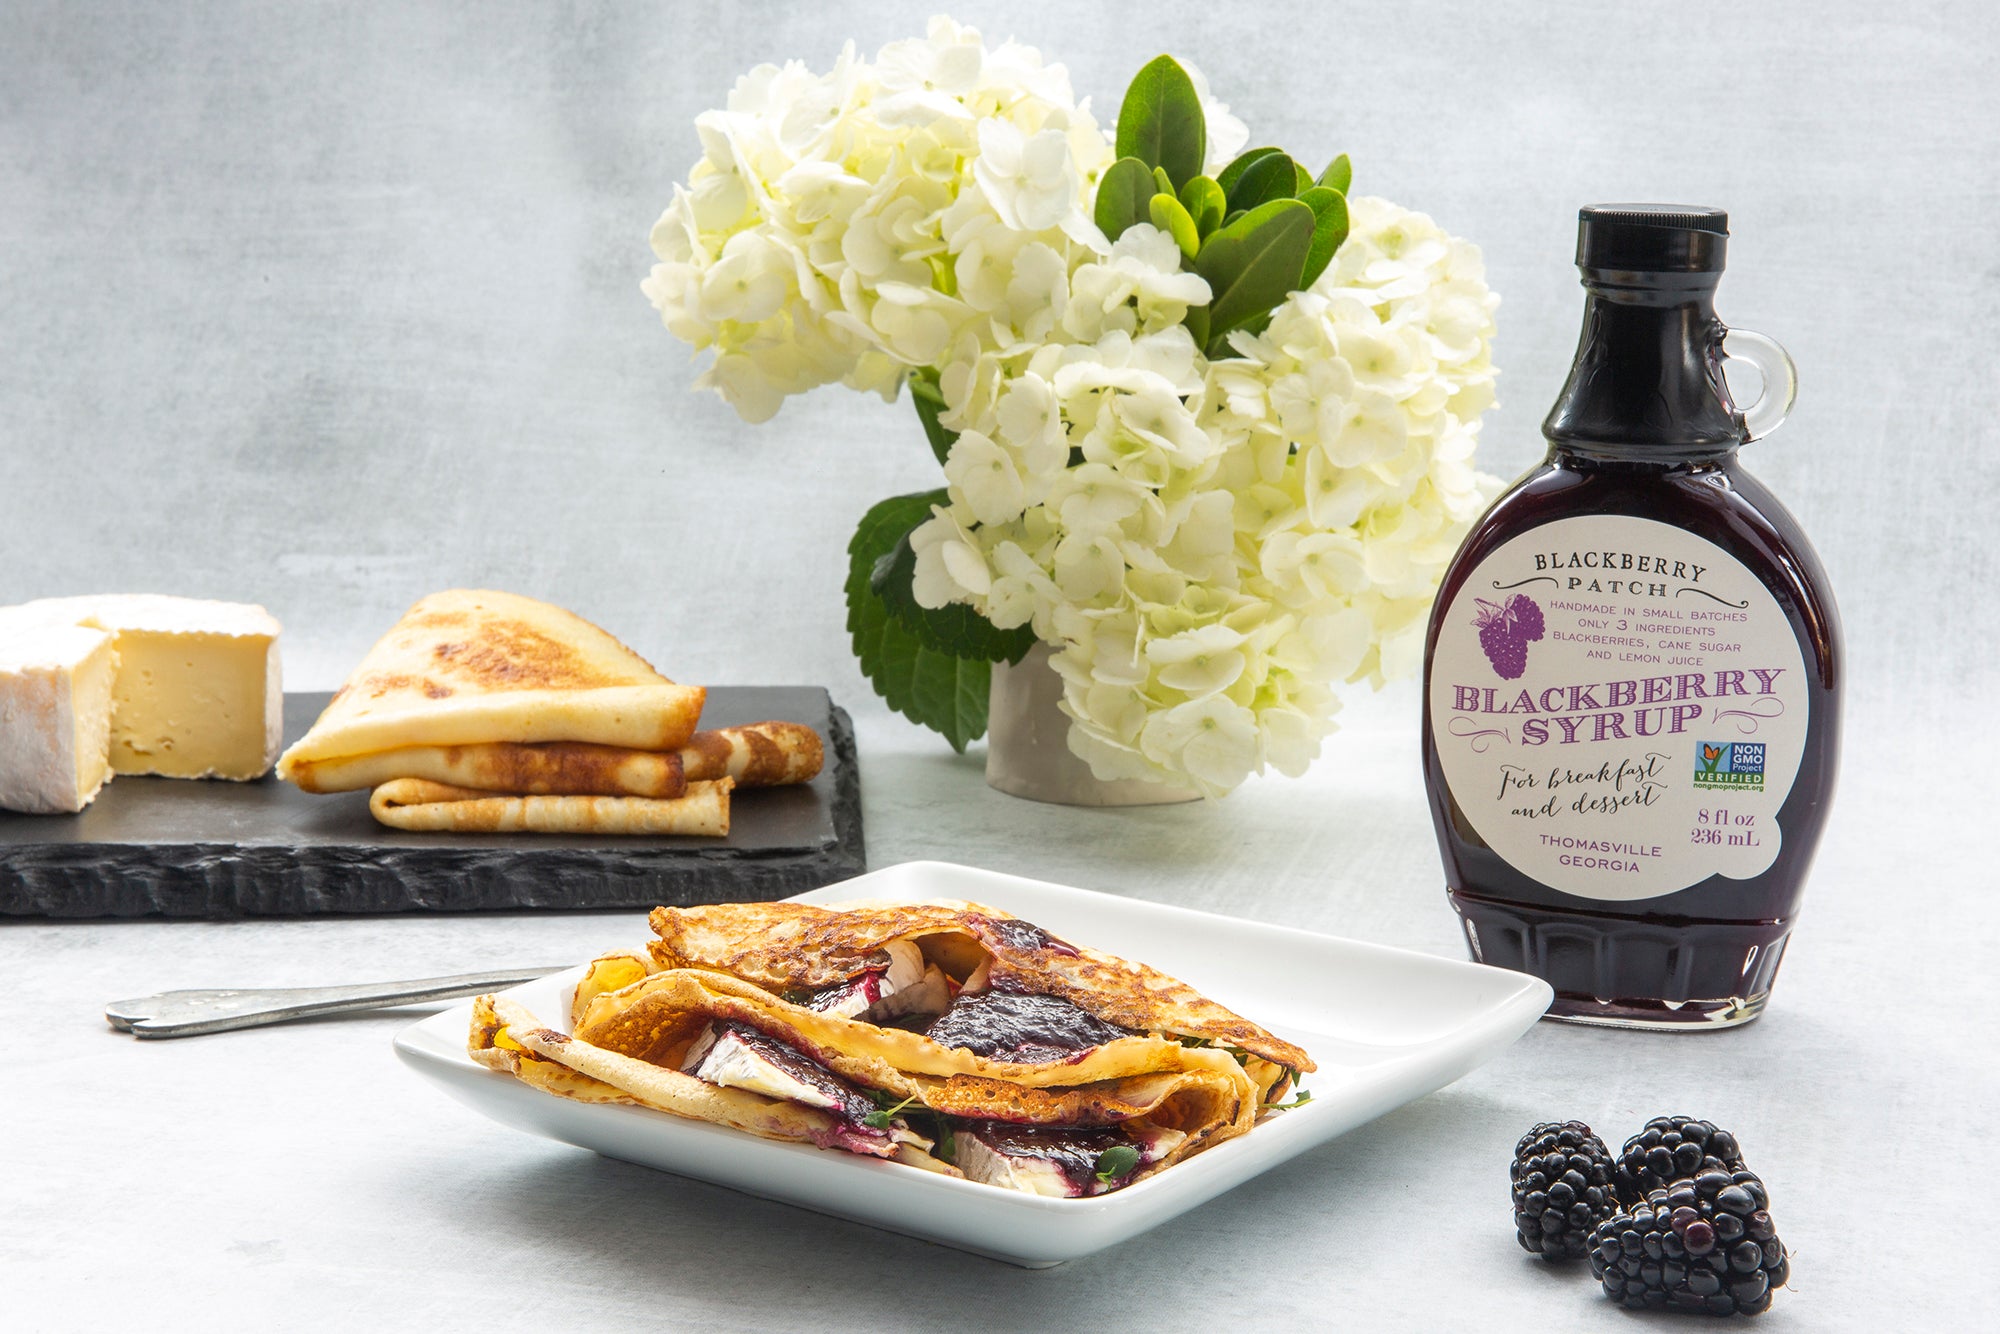 Recipe photo of Blueberry and Camembert Crepe using Blackberry Patch Premium Blackberry Syrup